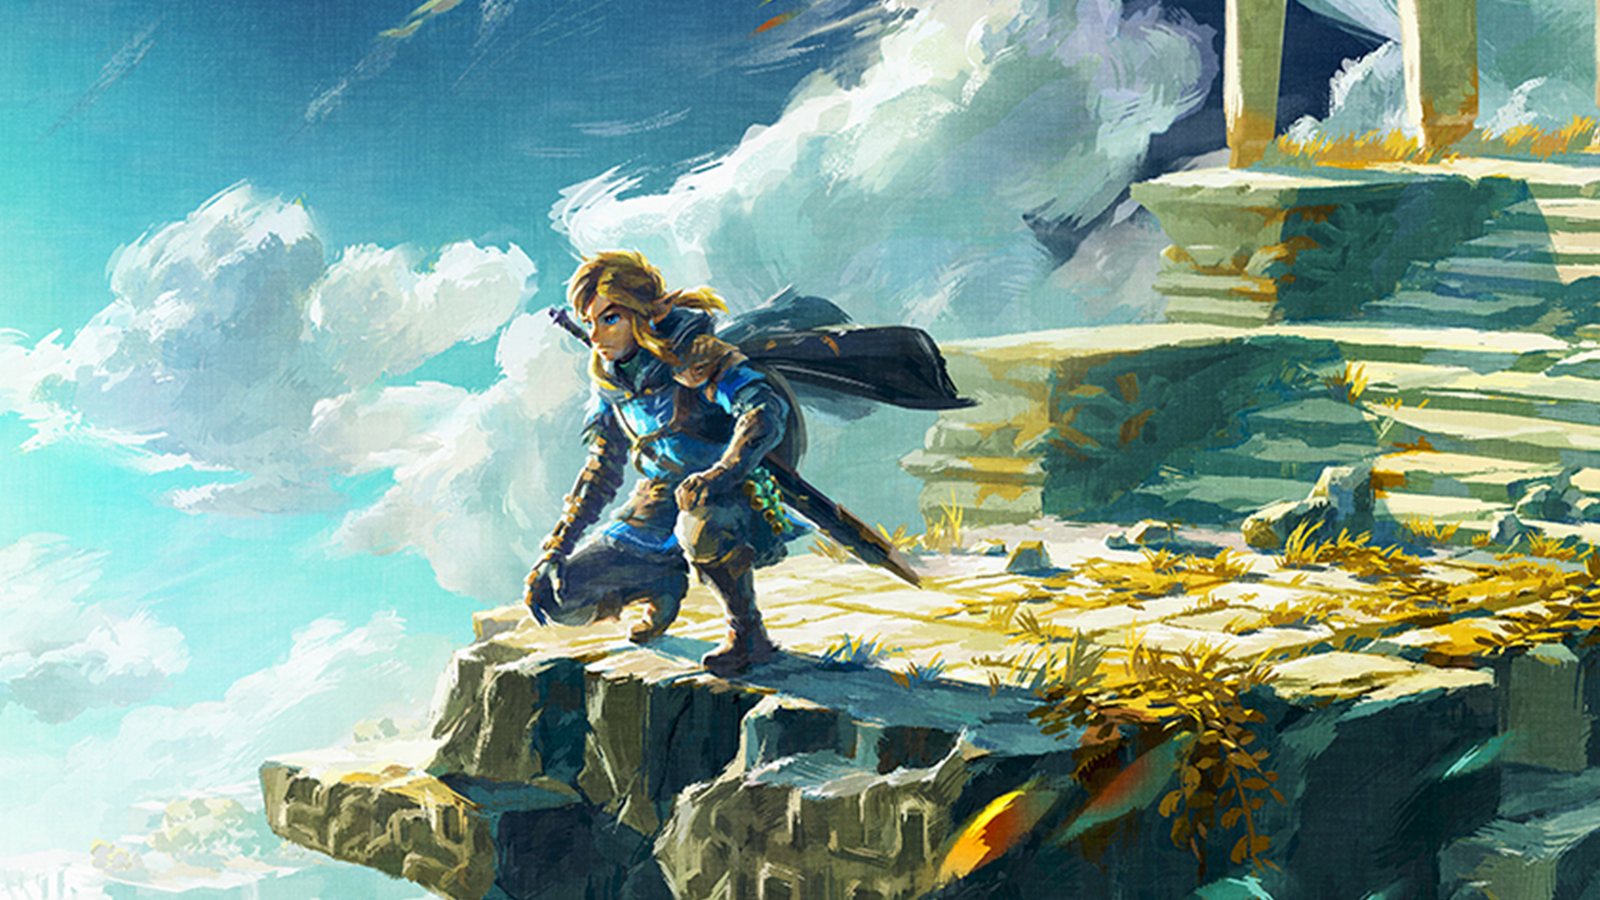 The Legend of Zelda: Tears of the Kingdom: Release Date, Gameplay